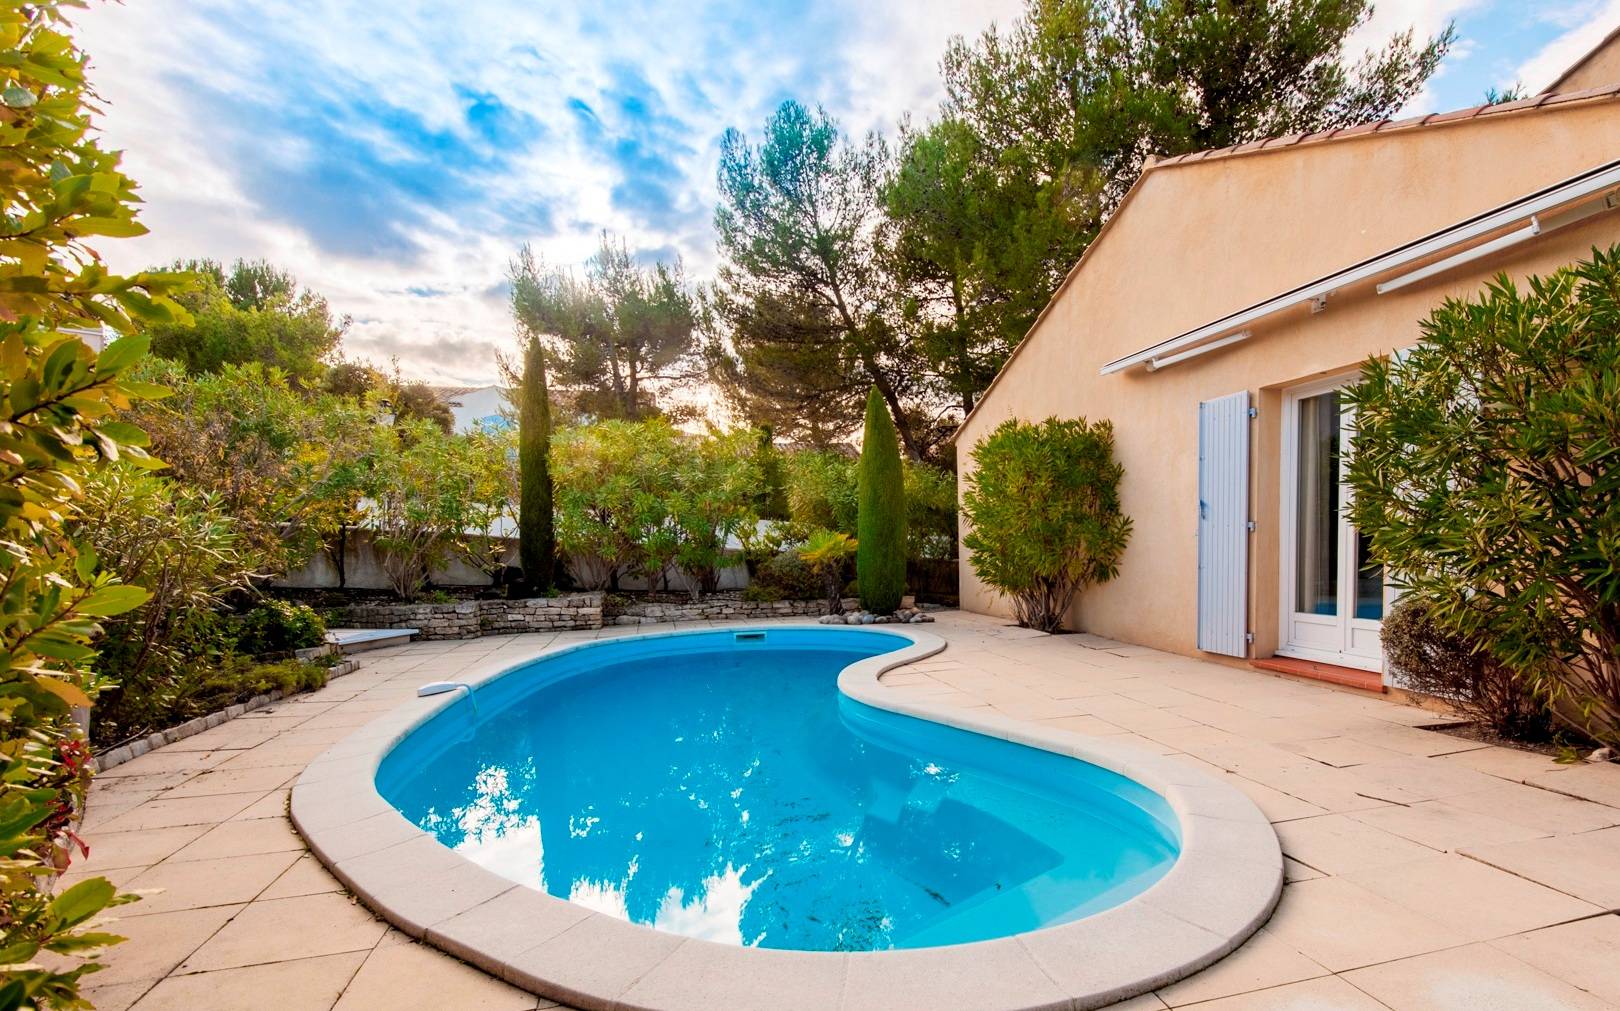 Single level villa centrally located in the gated community of Pont Royal